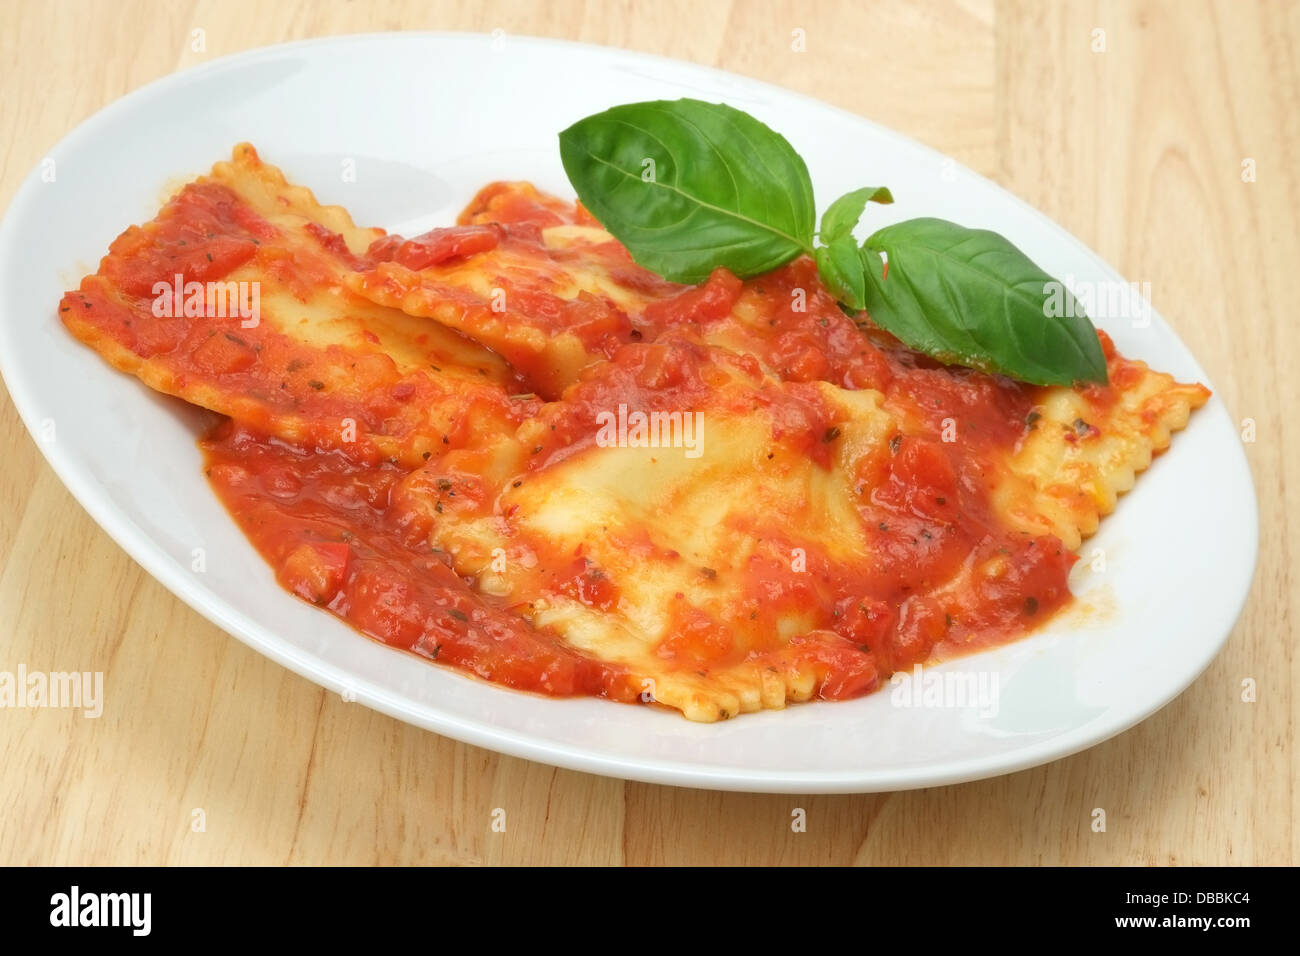 Cheese filled ravioli pasta in a red tomato sauce with a basil leaf garnish. Stock Photo